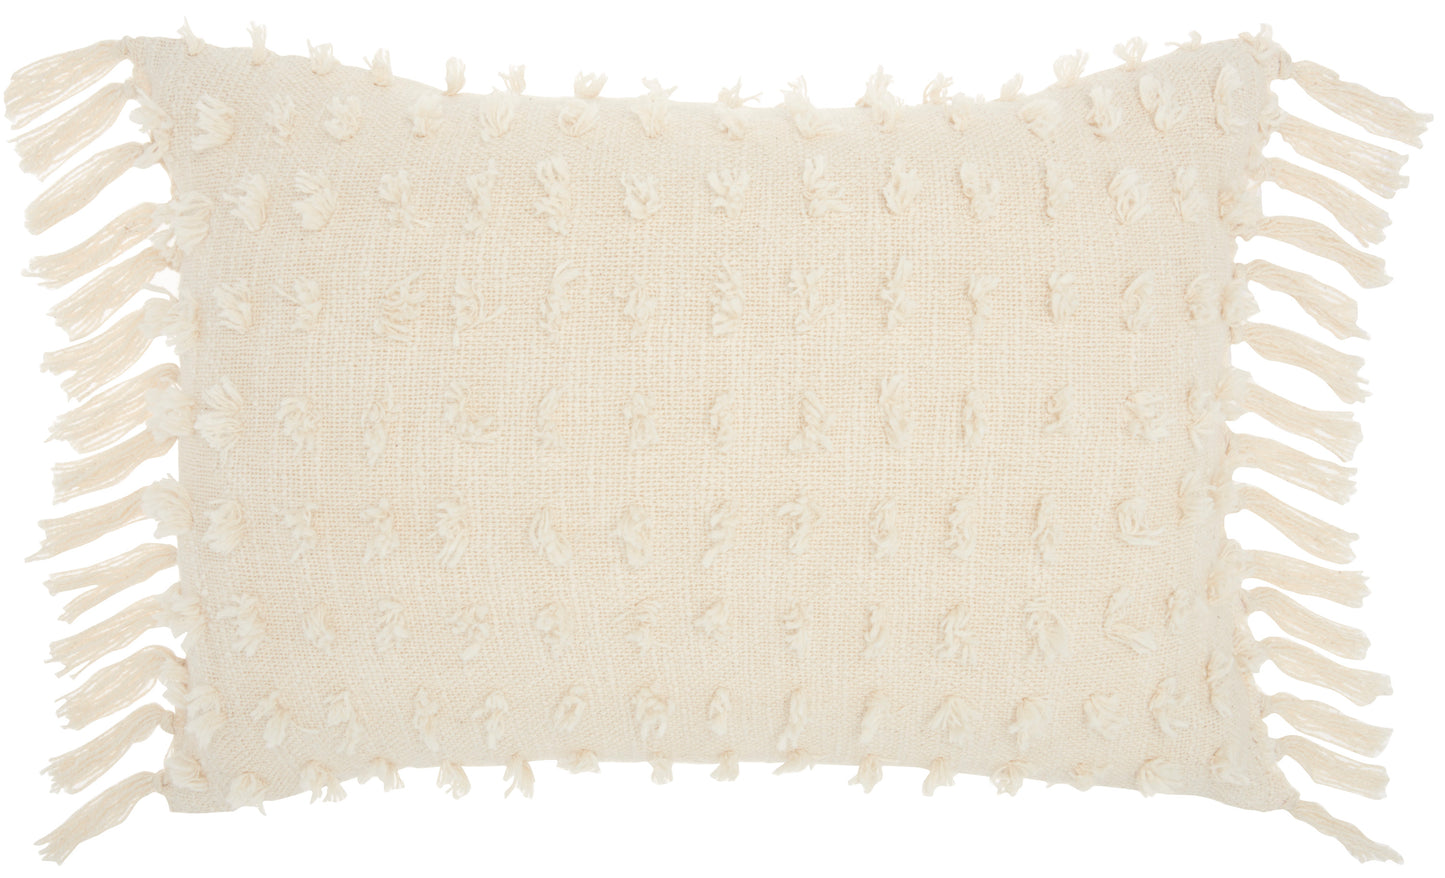 Life Styles GT037 Cotton Cut Fray Texture Throw Pillow From Mina Victory By Nourison Rugs